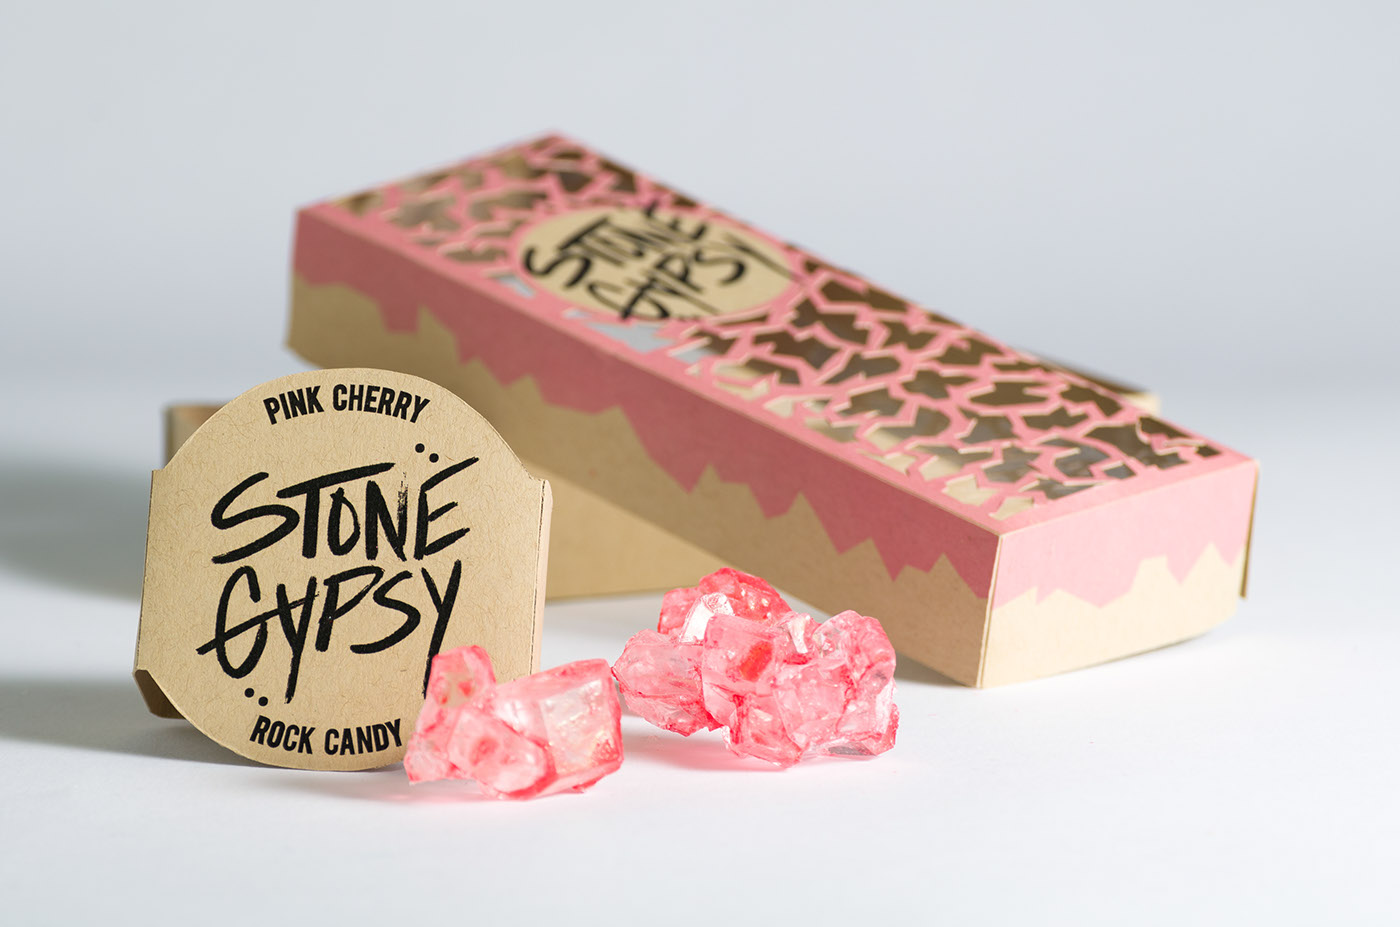 Rock Candy gypsy stone Stone Gypsy package design  candy packaging die cut Green Packaging recyclable